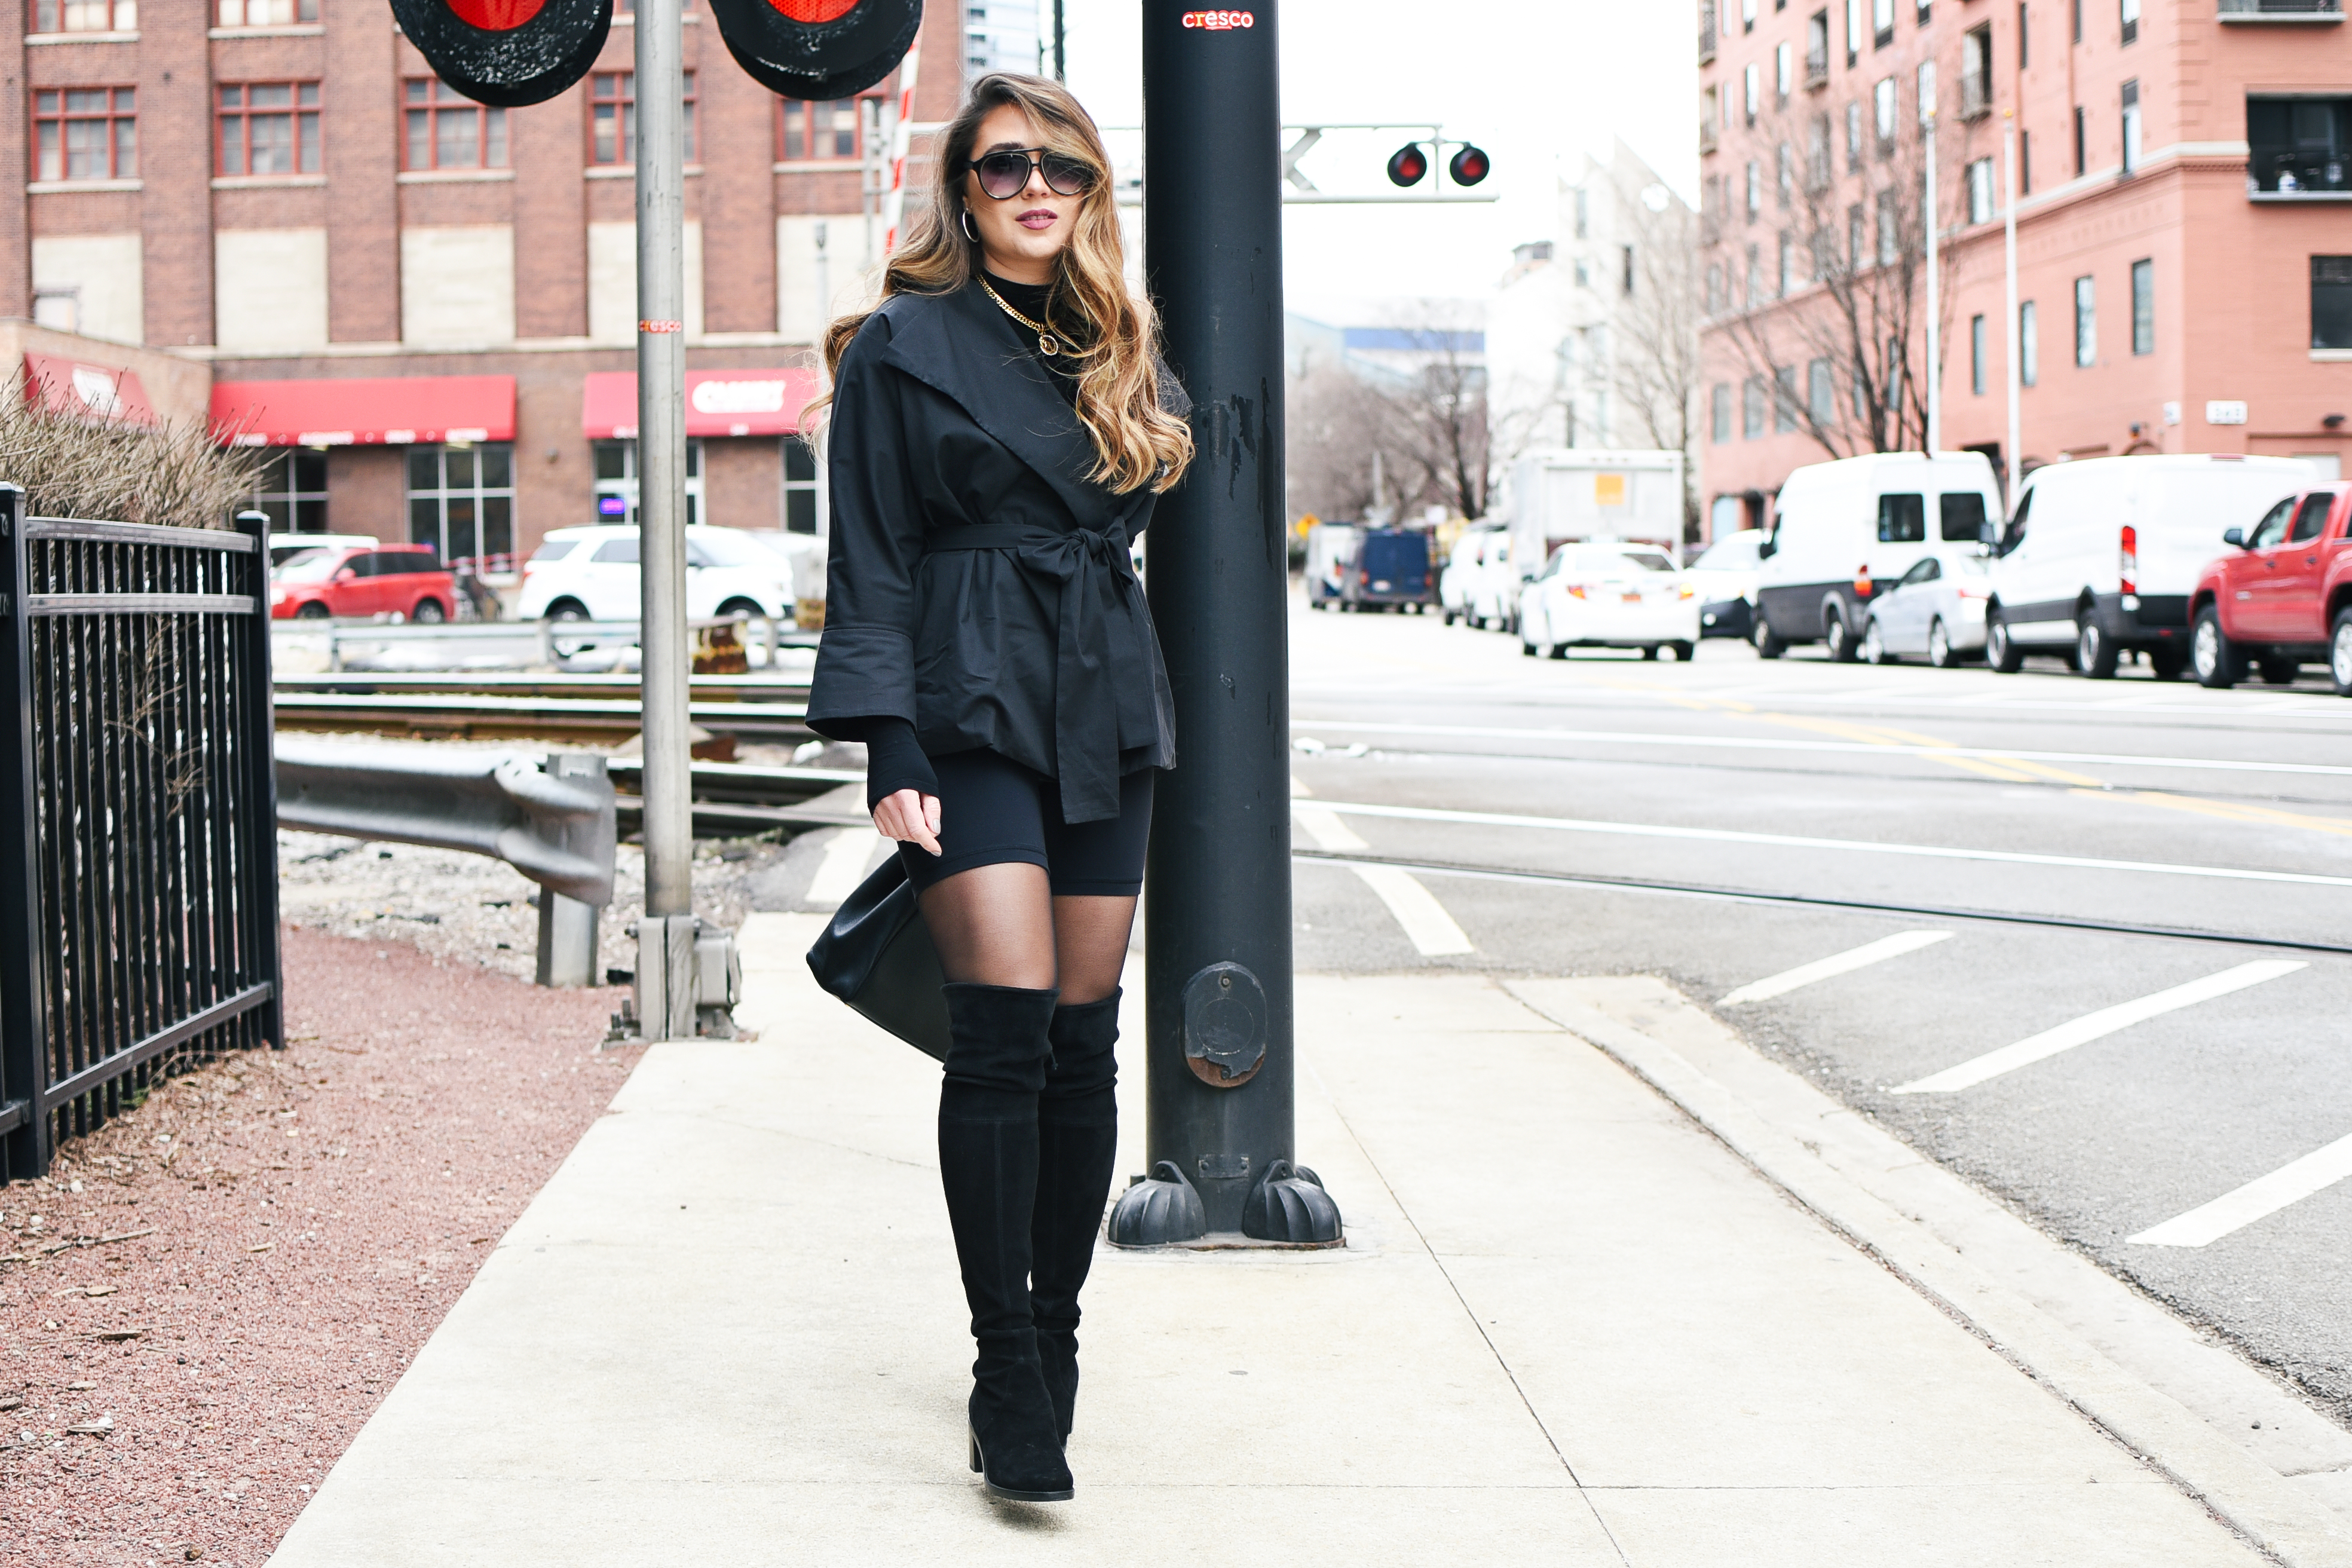 chic-biker-shorts-outfit-black-over-the-knee-boots-tights-tie-trench-fendi-purse